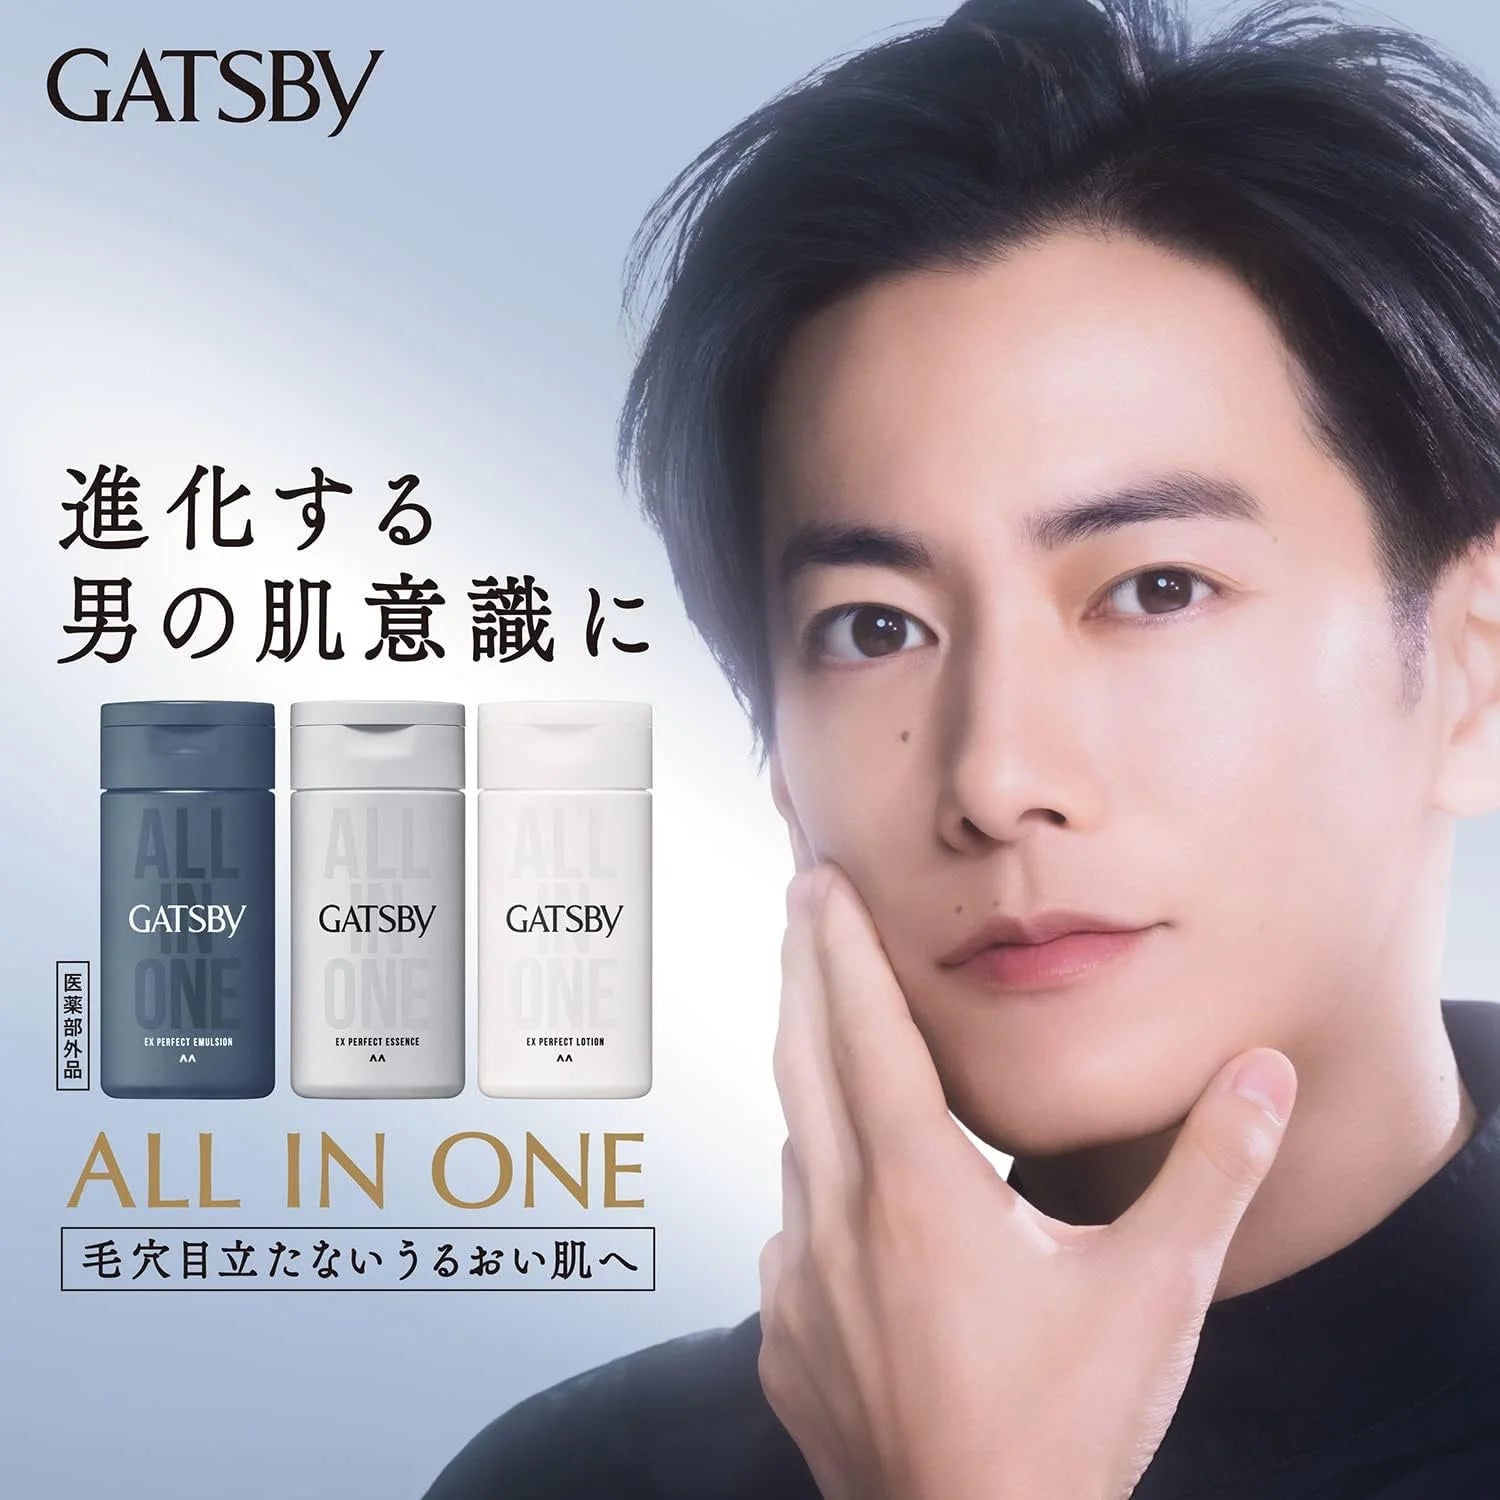 Gatsby All In One EX Perfect Essence For Men 150ml - Buy Me Japan